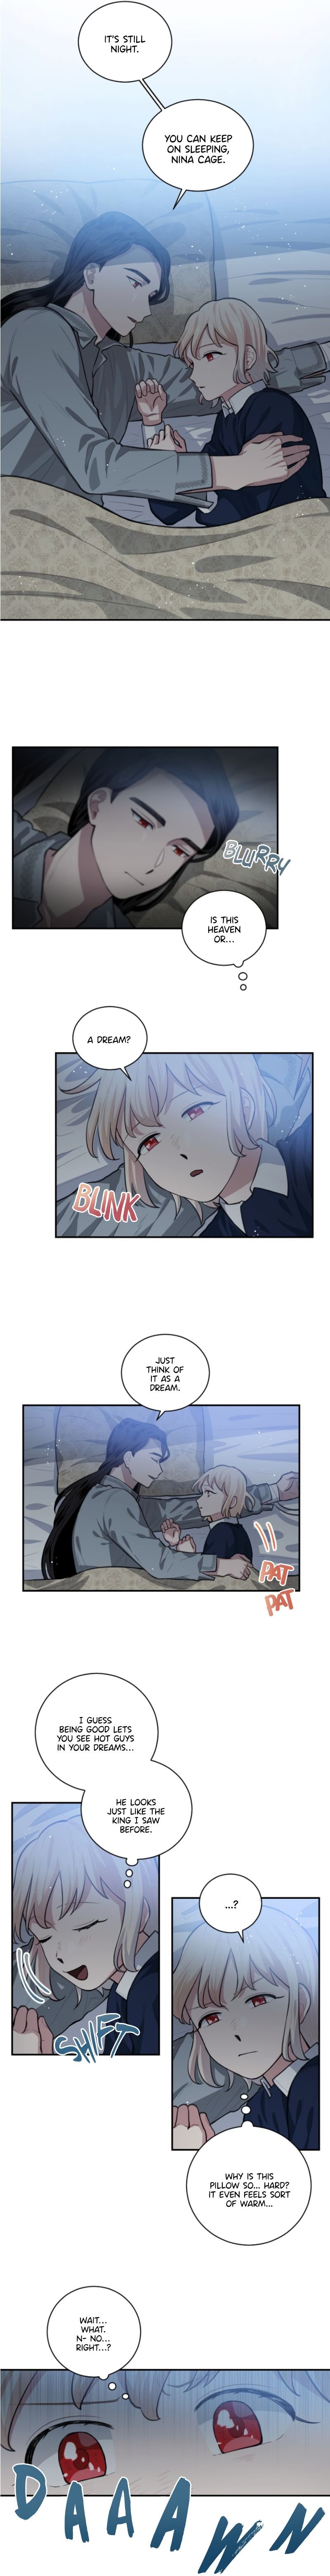 I Became a Maid in a TL Novel Chapter 7 - Page 4